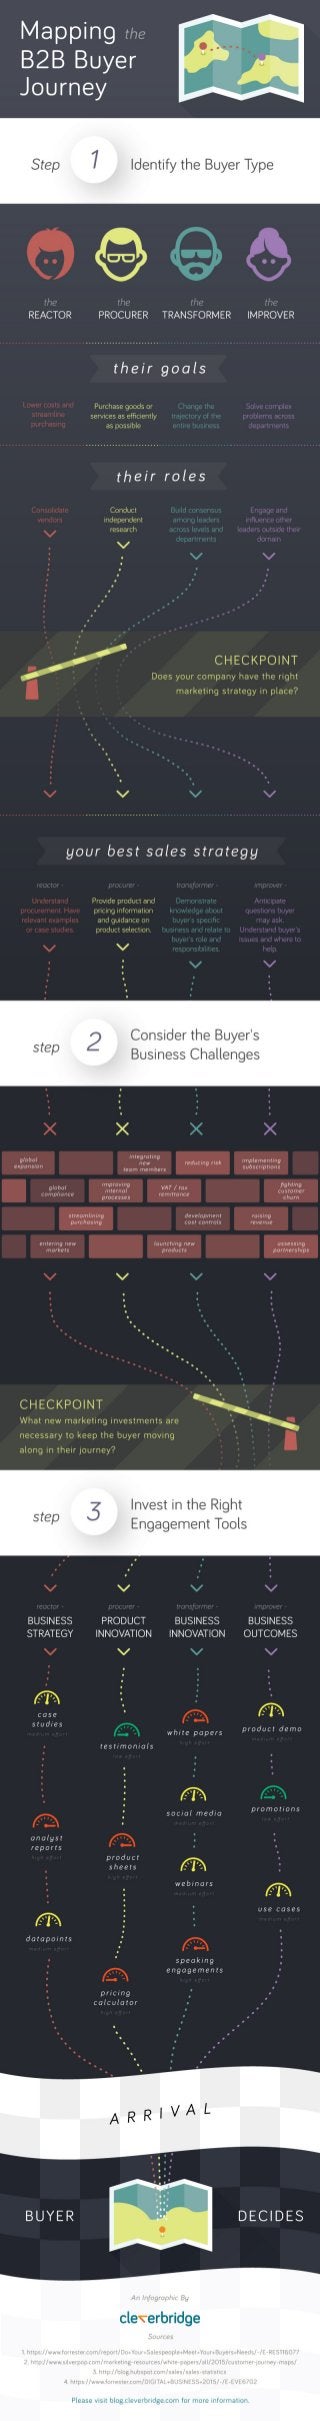 Mapping the B2B Buyer Journey [Infographic]